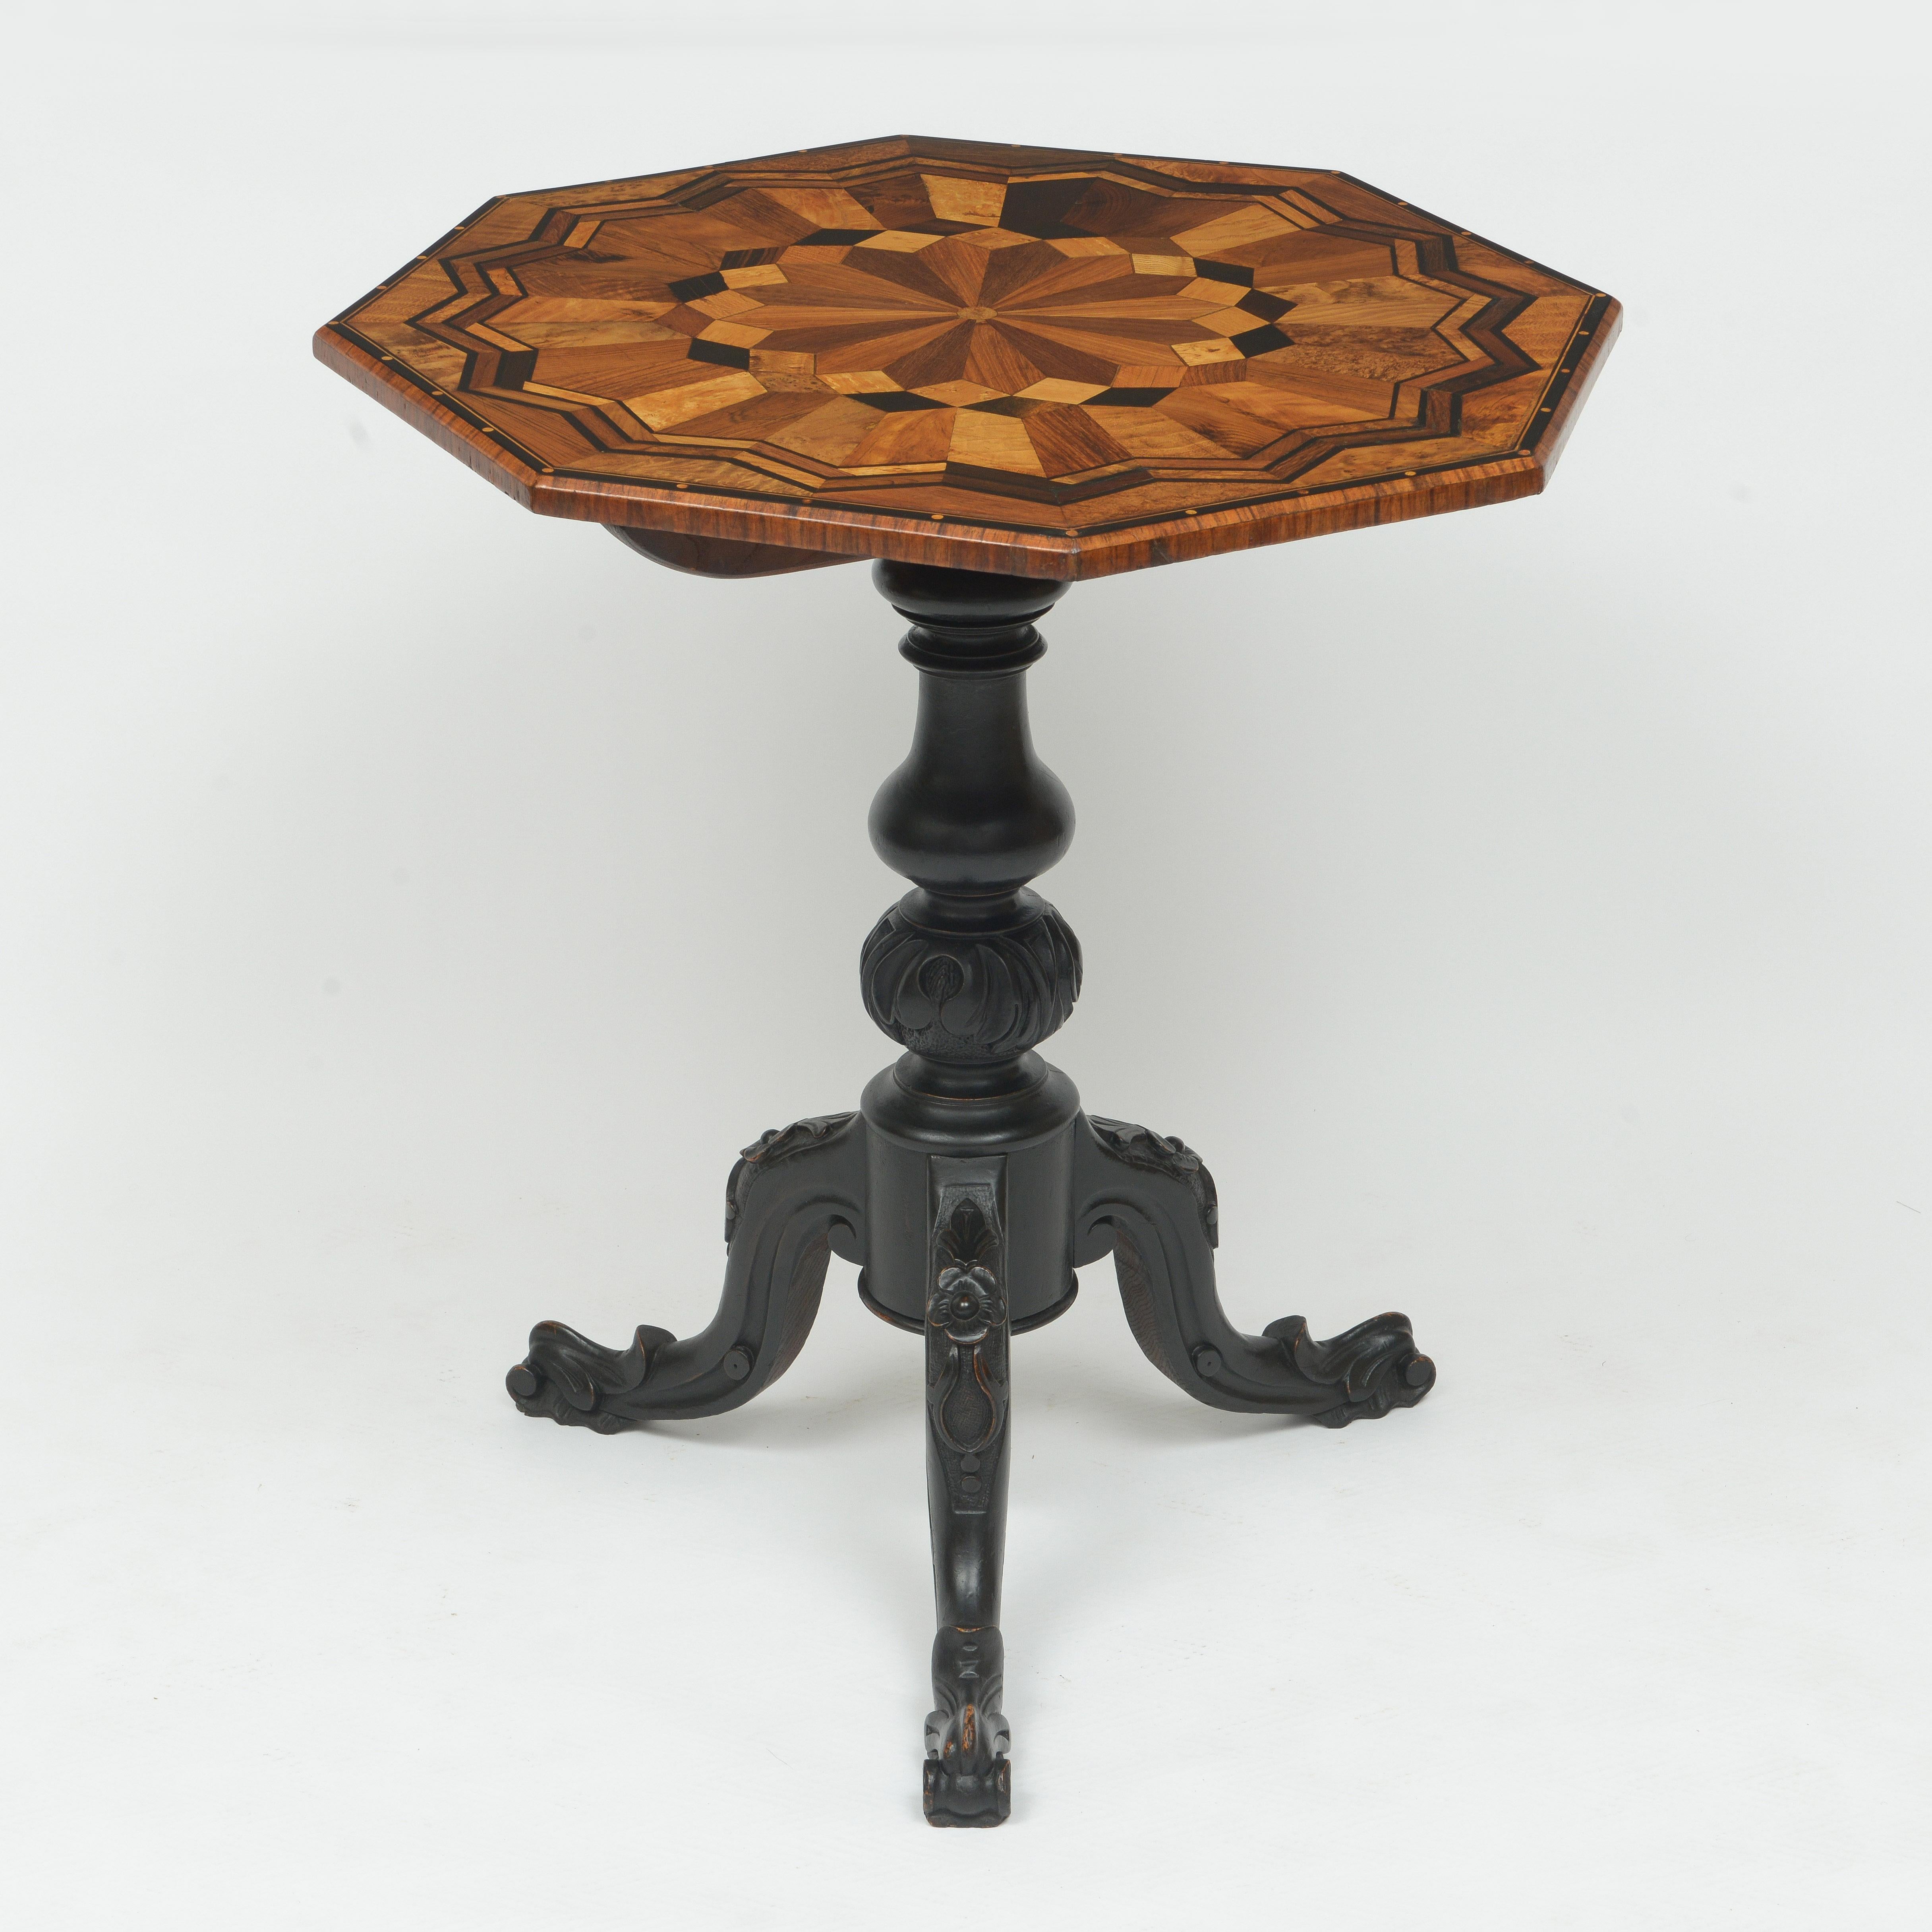 British 19th Century Tilt Top Parquetry Table With Ebonized Base For Sale